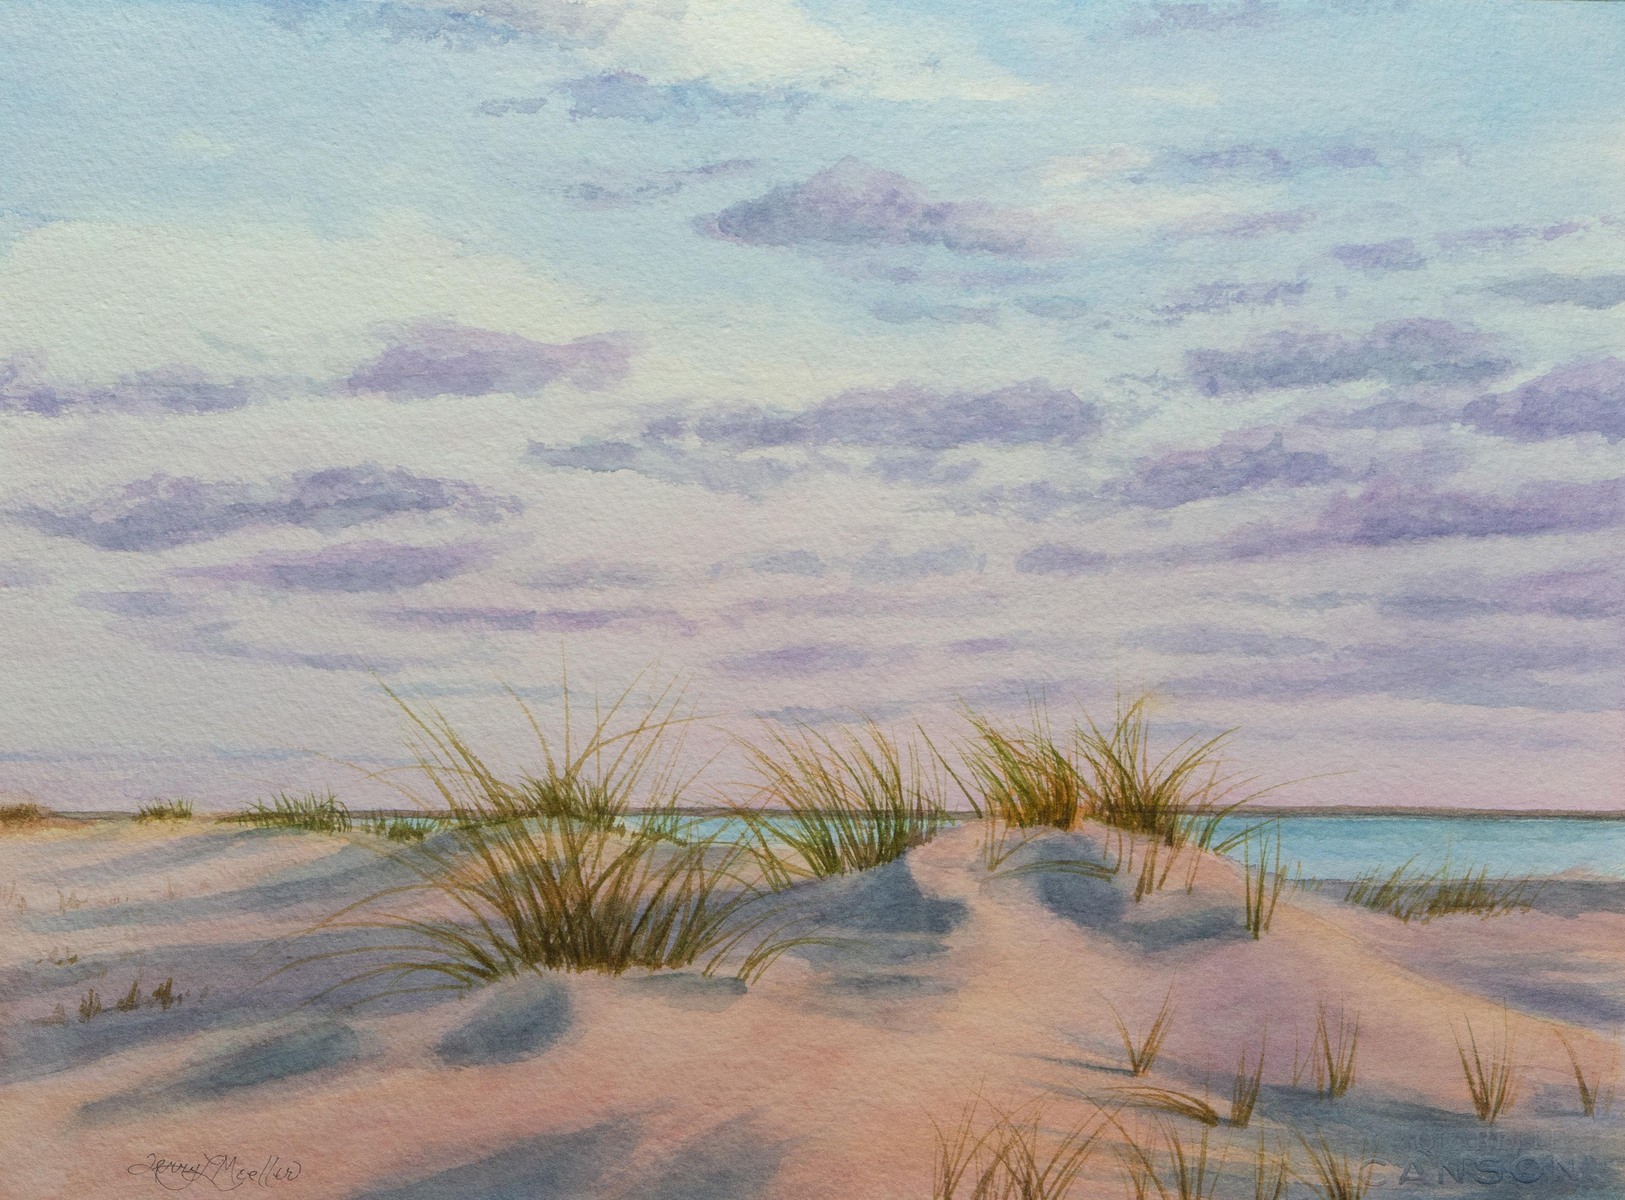 "An Evening at the Beach, Tybee Island"     10.75" X 14.75"     watercolor on 300 lb. watercolor paper